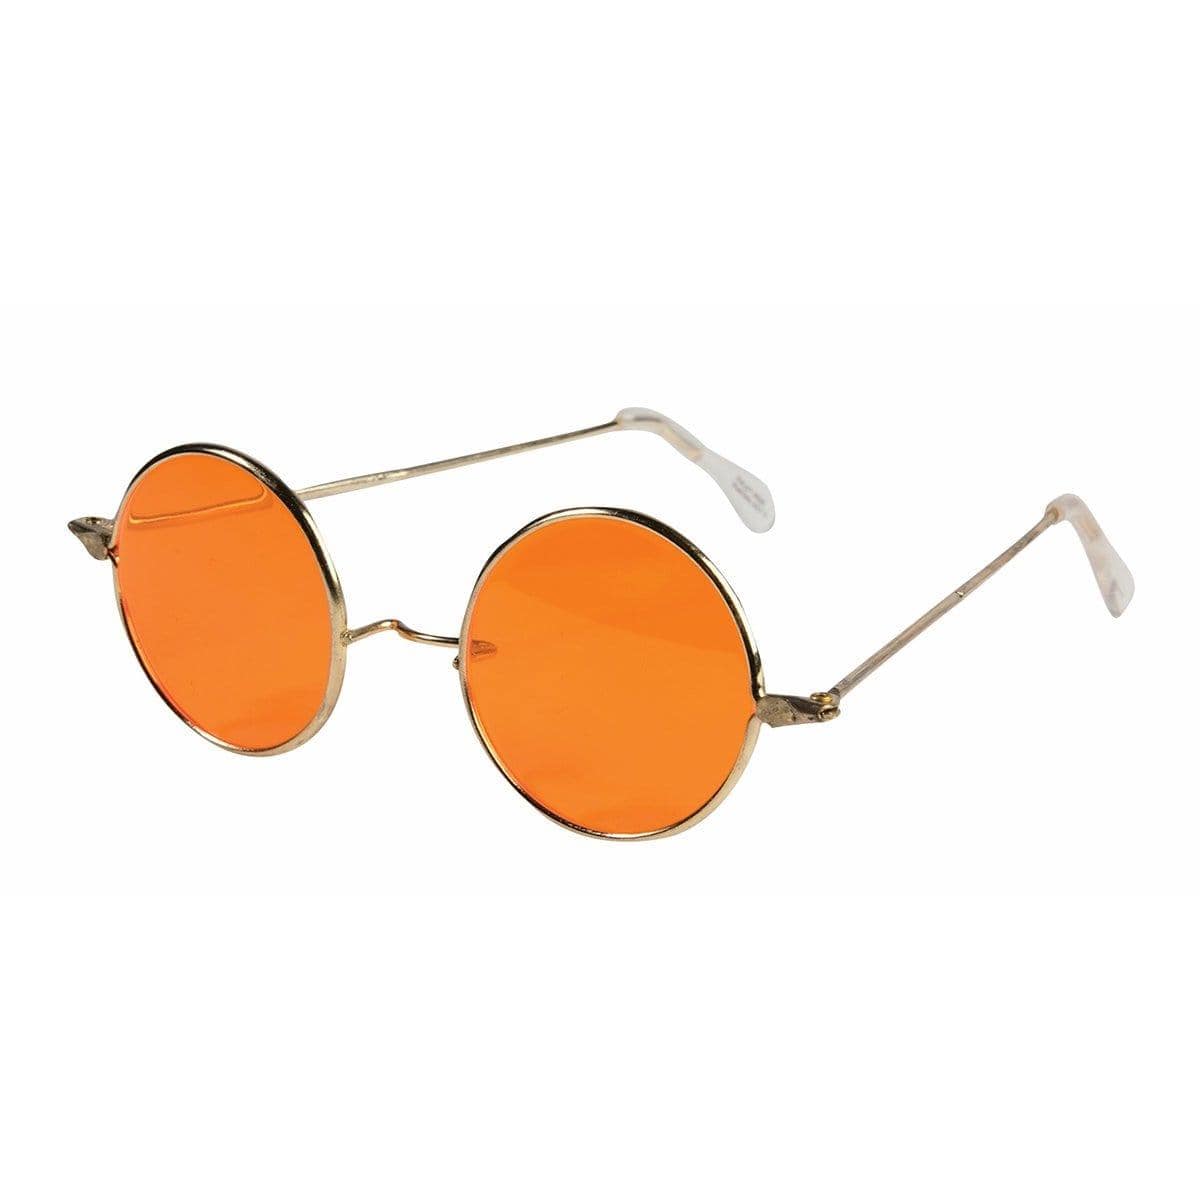 Buy Costume Accessories Orange hippie glasses sold at Party Expert